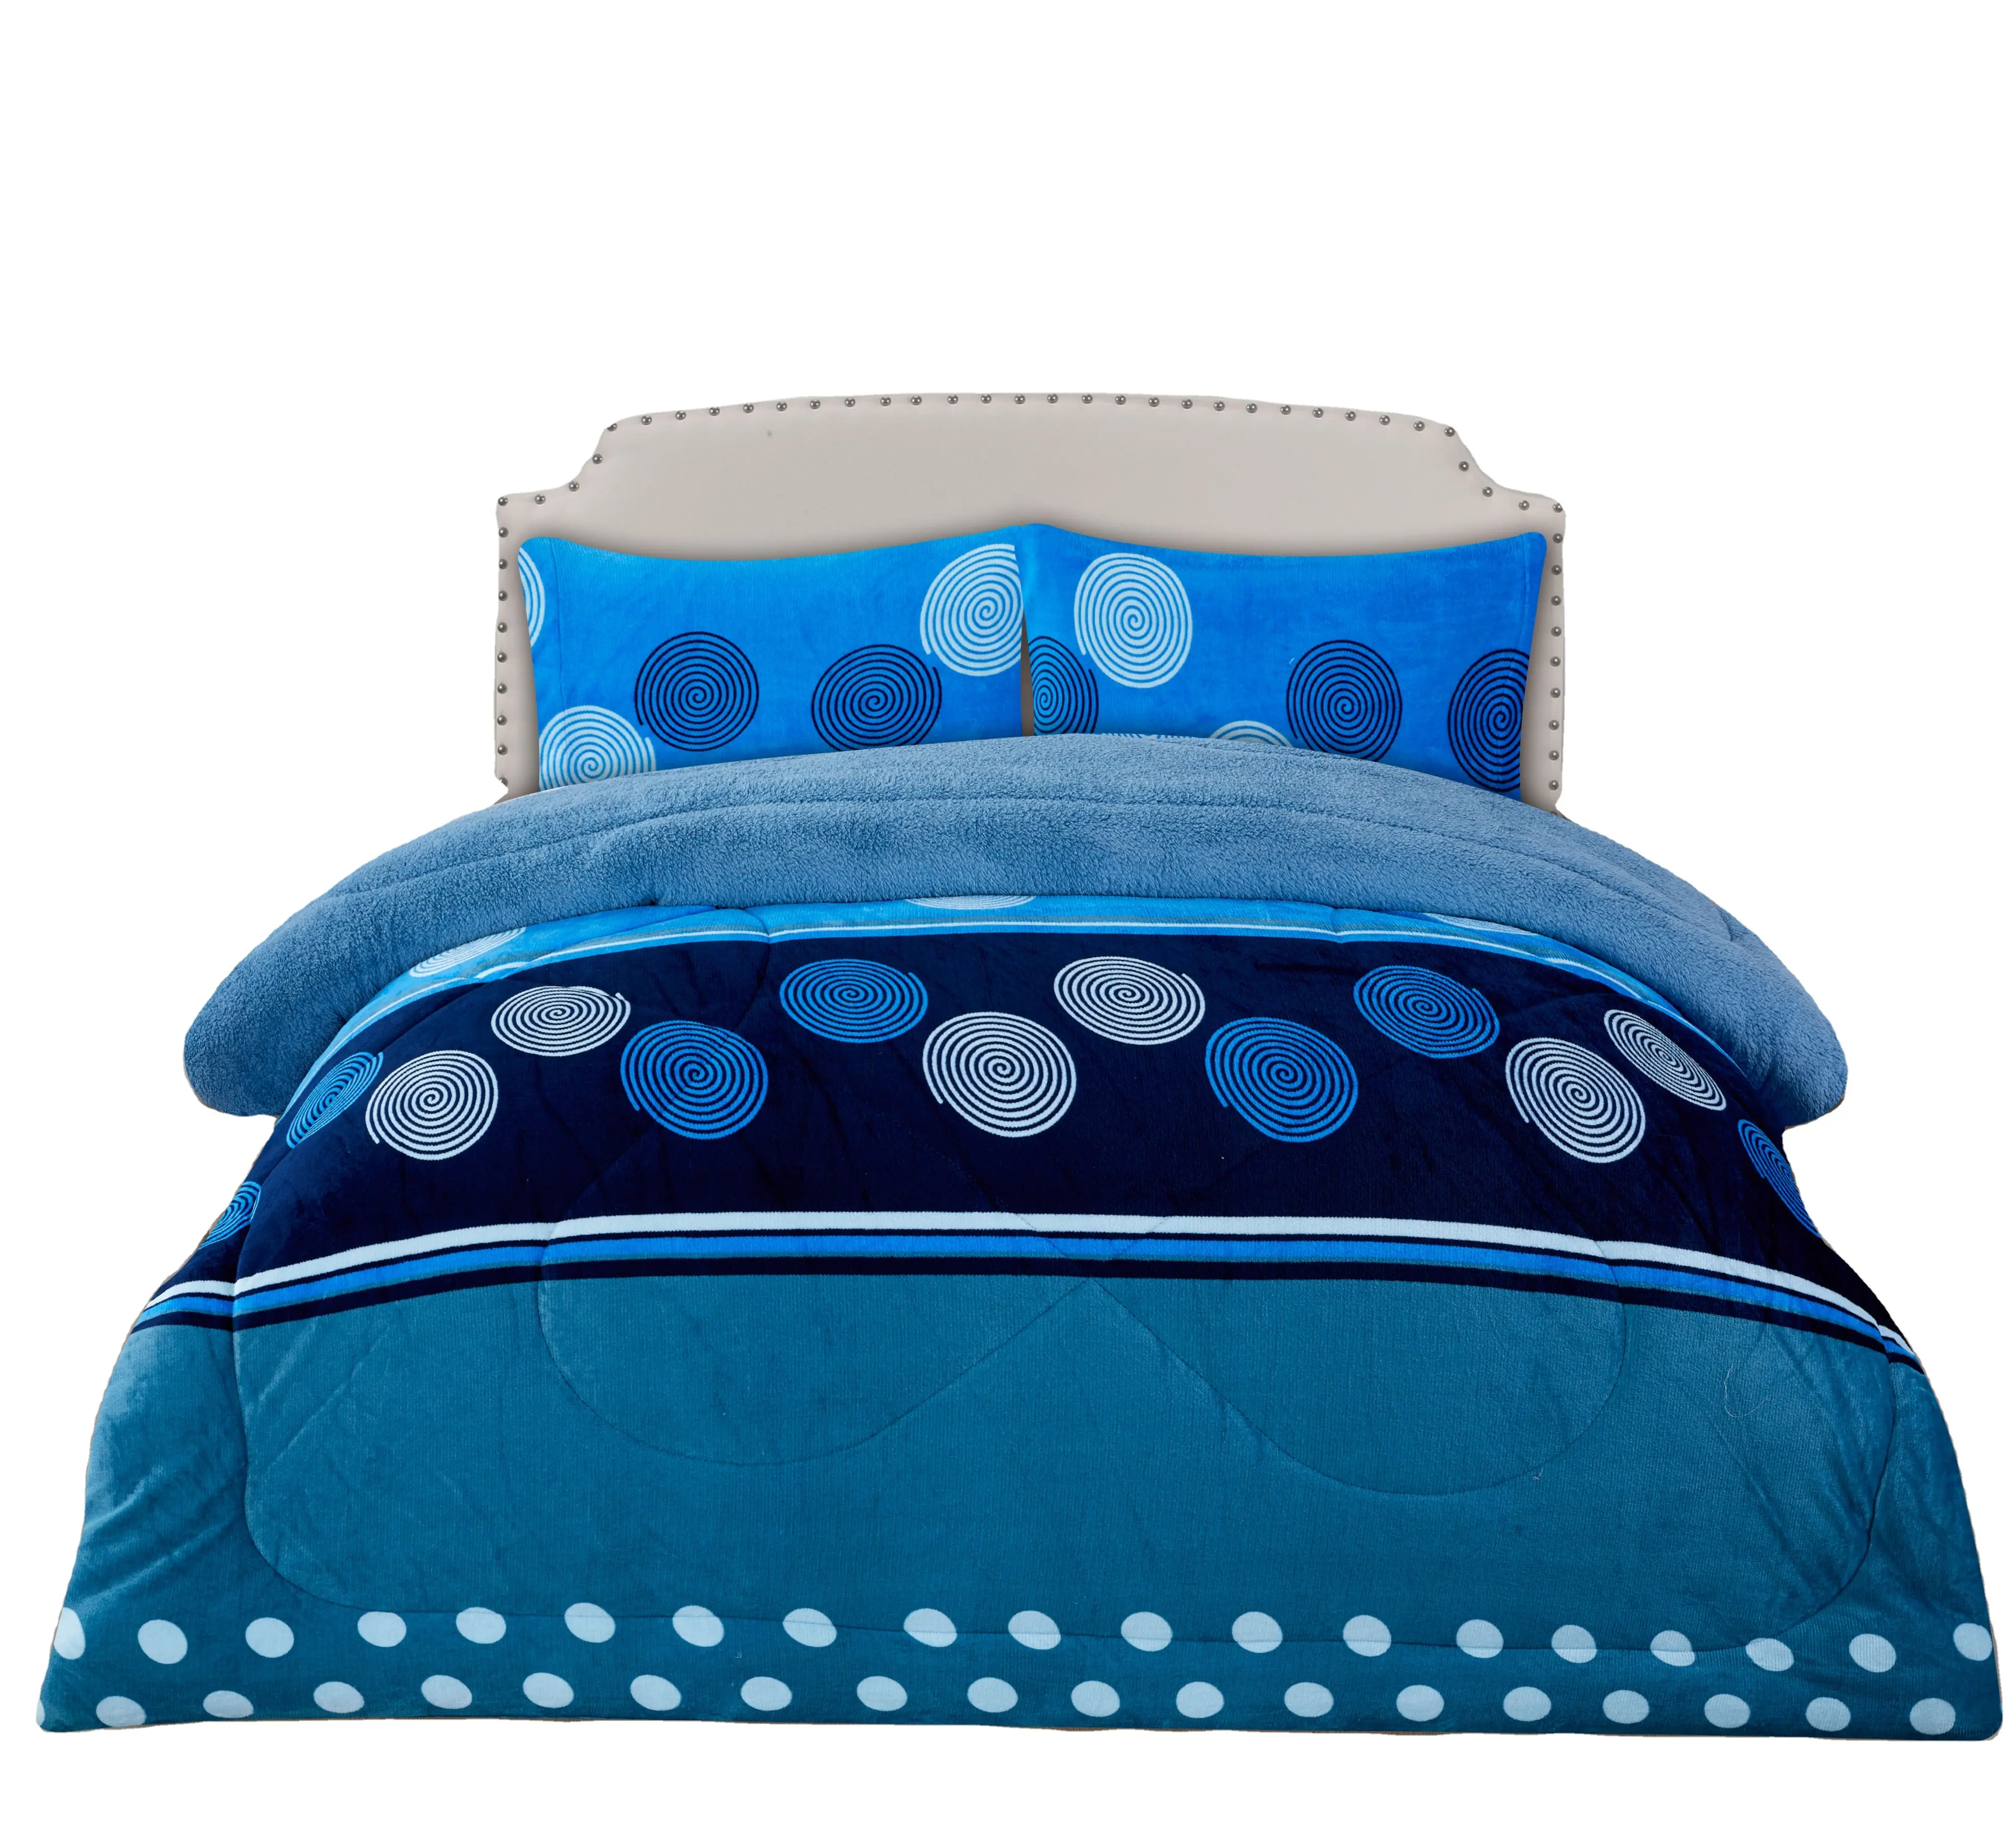 New products Printed Luxury Royal Comfort Borrego Flannel Set